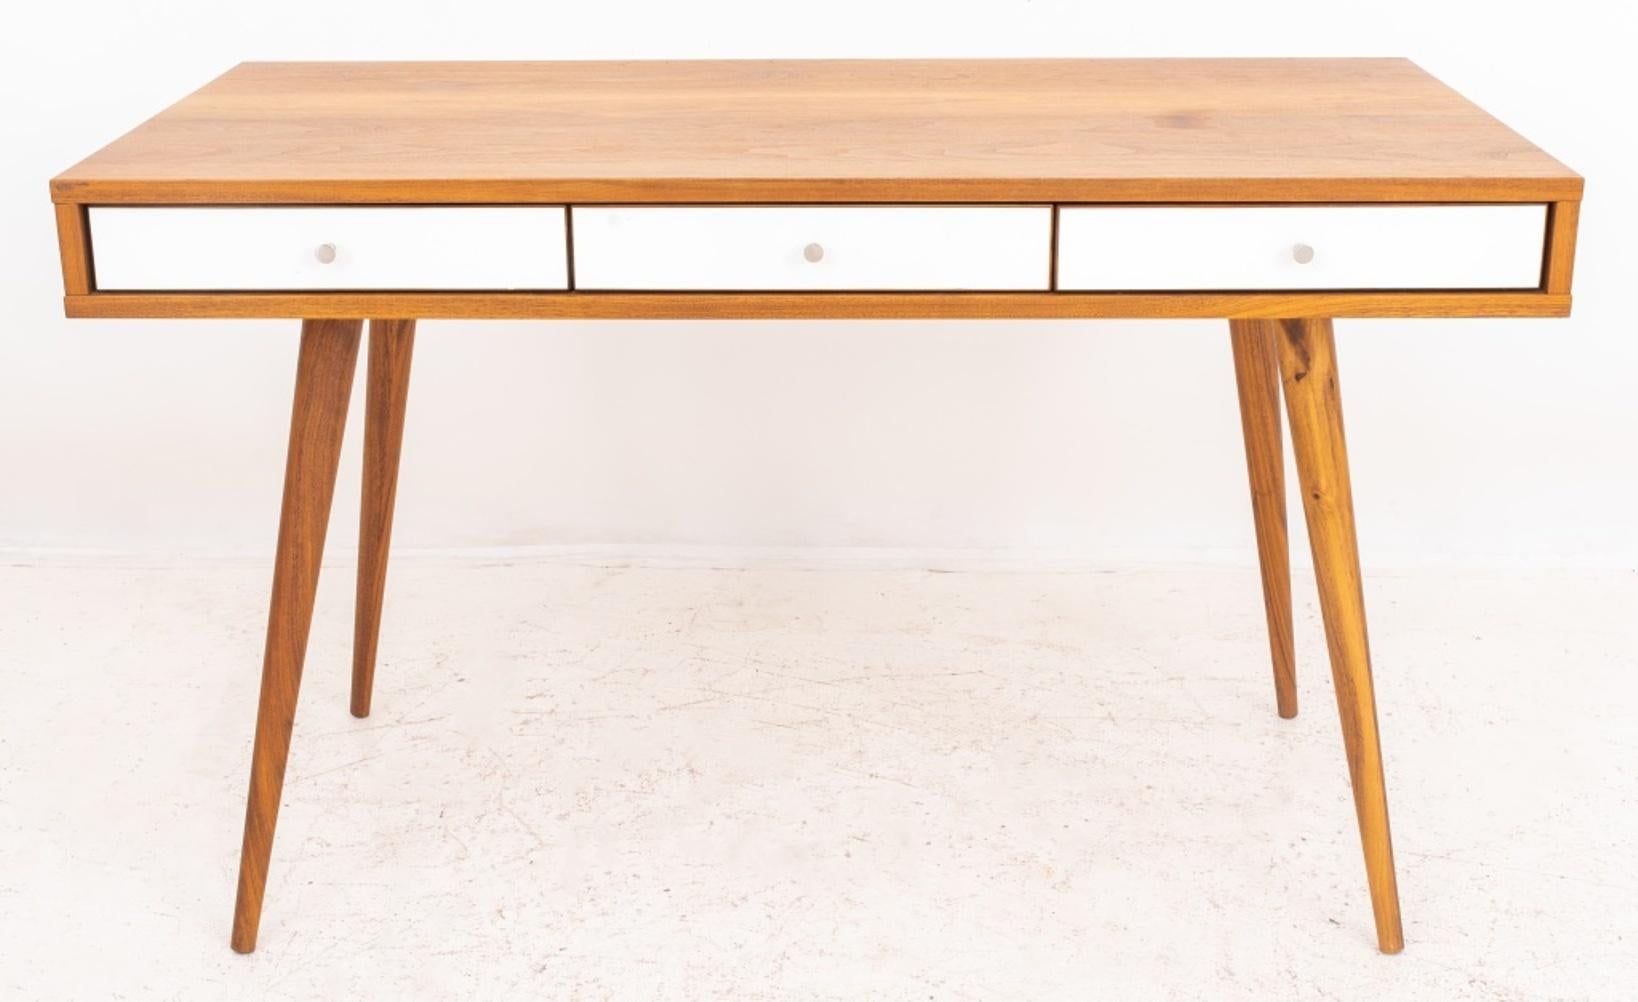 Mid-Century Modern style desk by DBS Furniture from the 